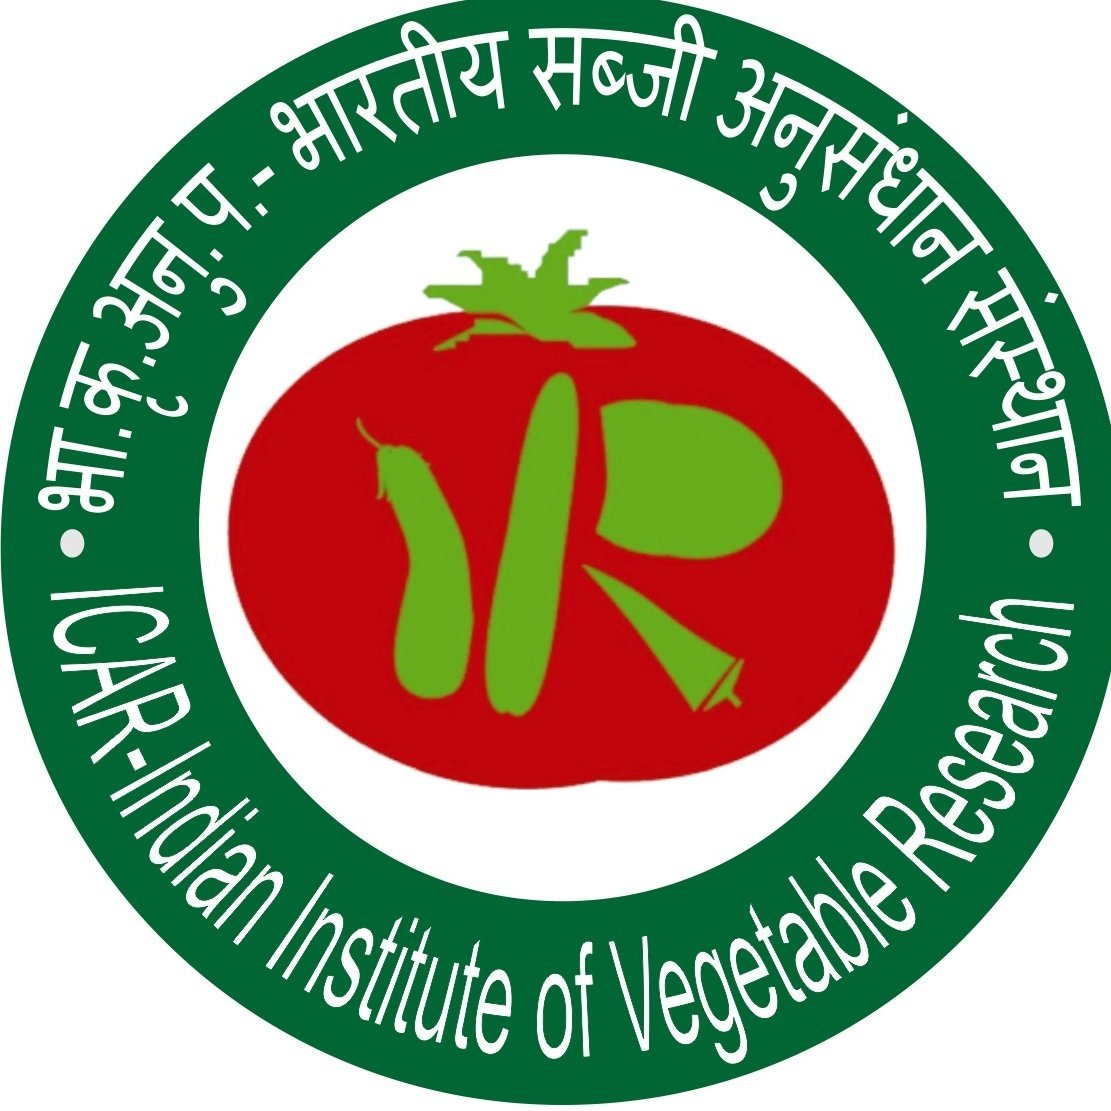 ICAR-IIVR, Varanasi is a field unit of Indian Council of Agricultural Research under the aegis of the DARE, Ministry of Agriculture & Farmers' Welfare, GOI